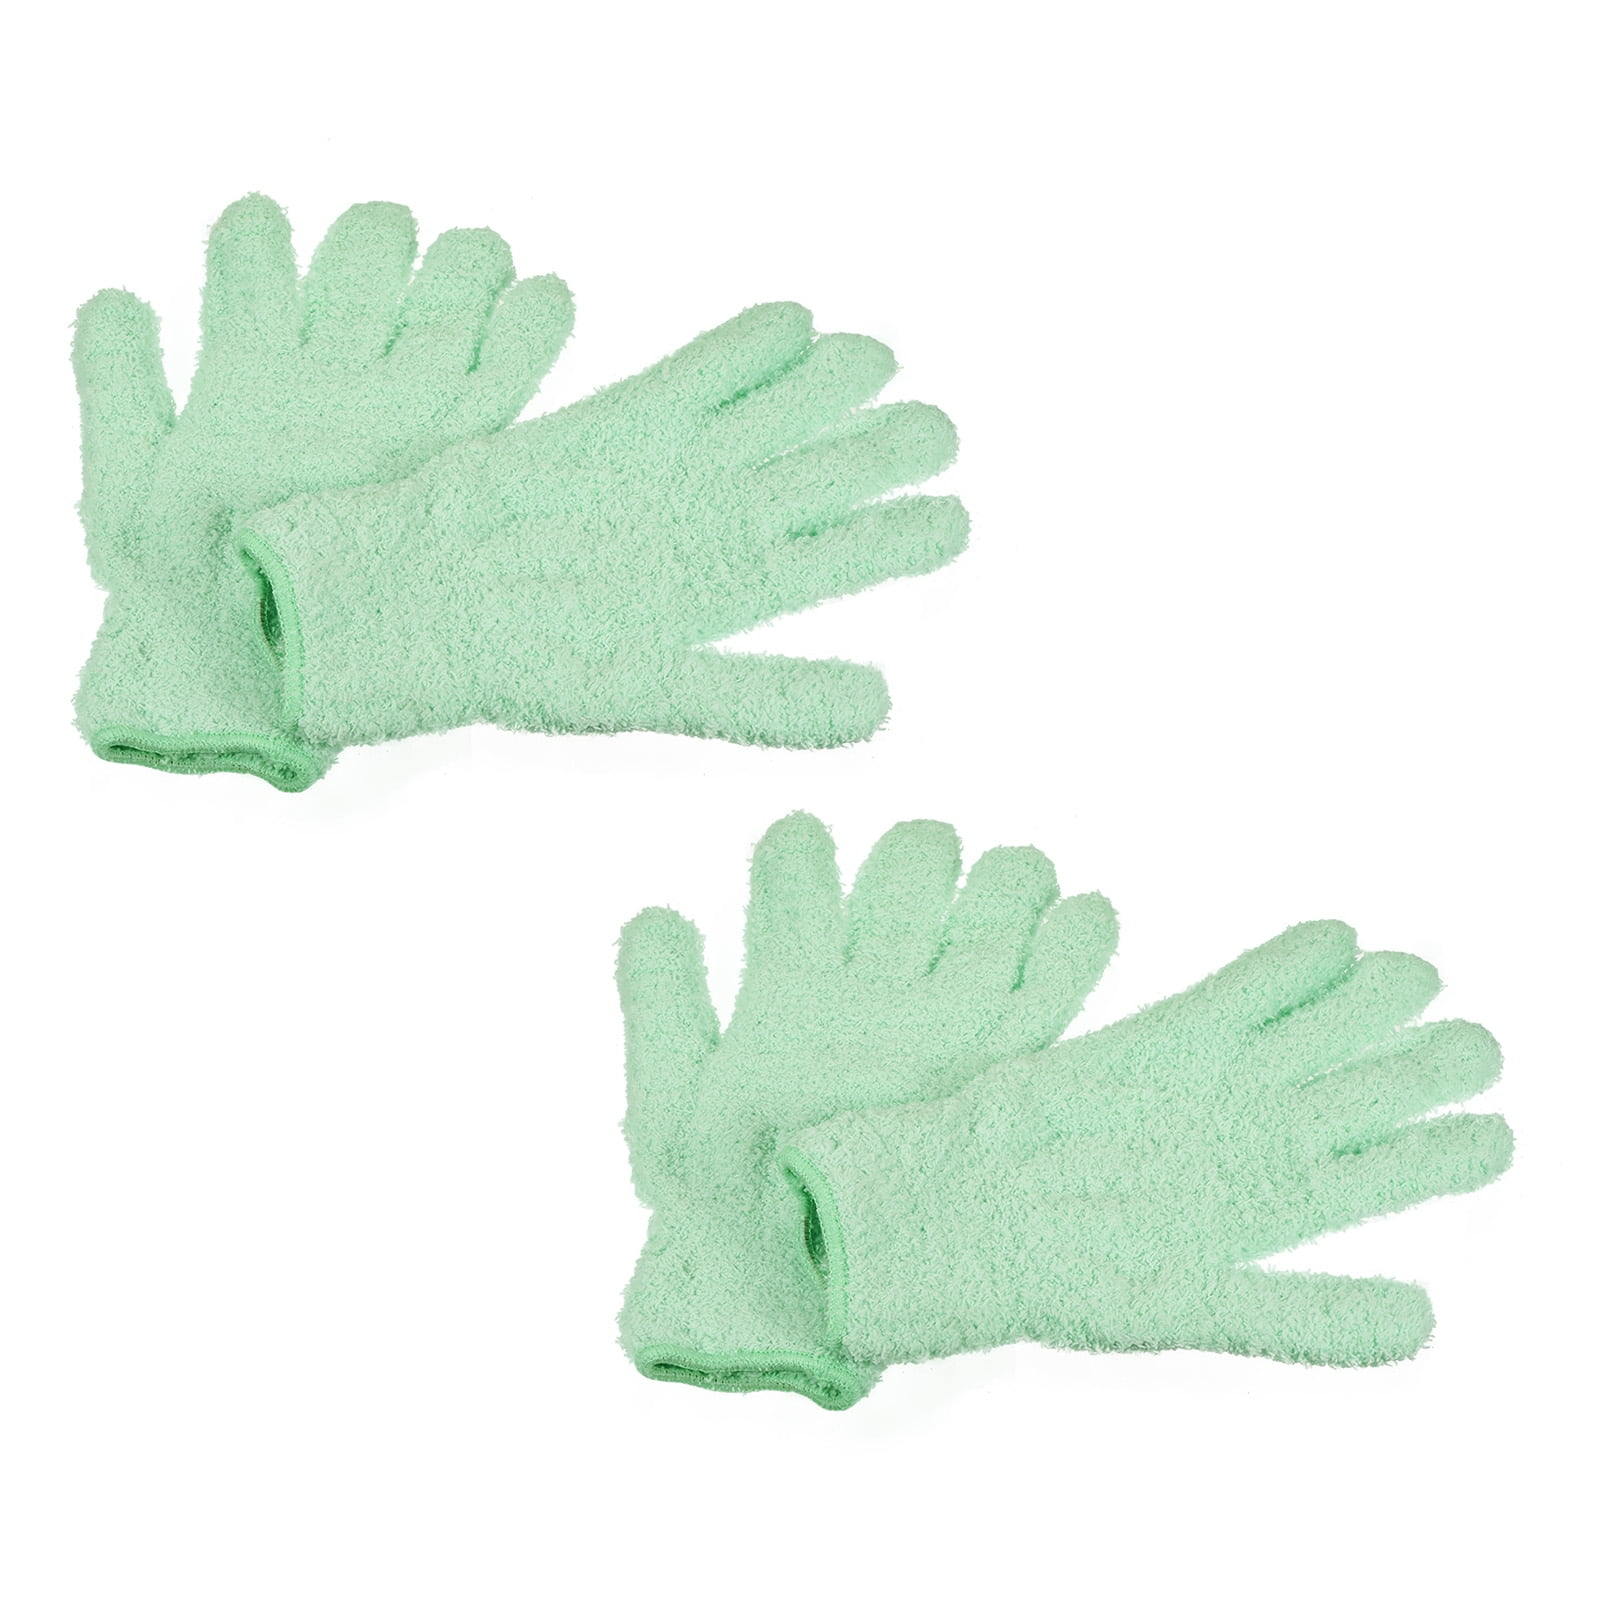 ON SALE-8 Microfiber Dusting Gloves & Glass Cleaning Mitts - Green, Yellow,  Blue